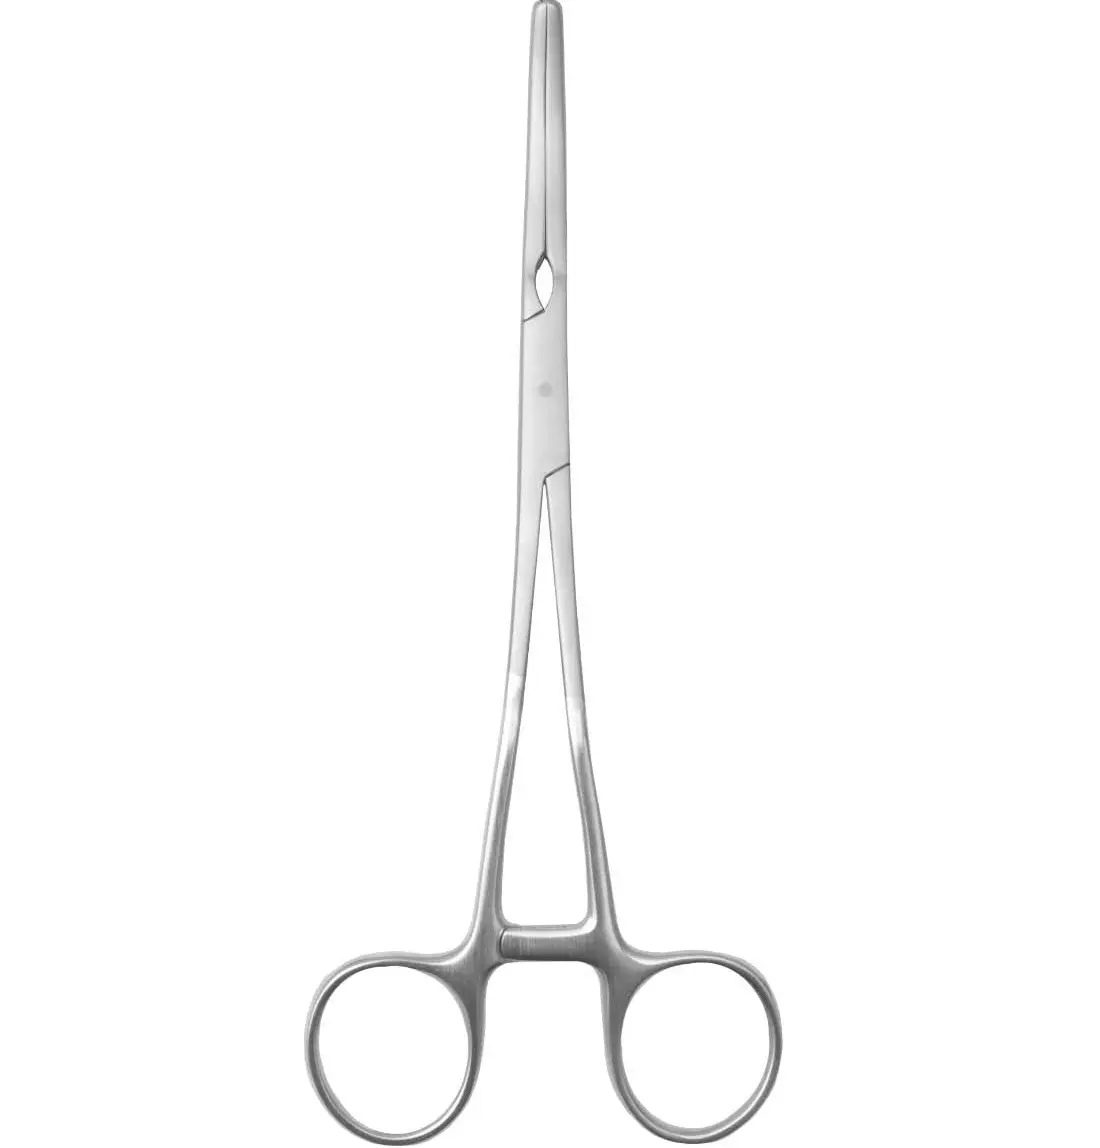 Best Quality Zeppeline Clamps Forceps Hysterectomy Instruments, Obstetrics & Gynecology Equipments / Instruments Reusable,